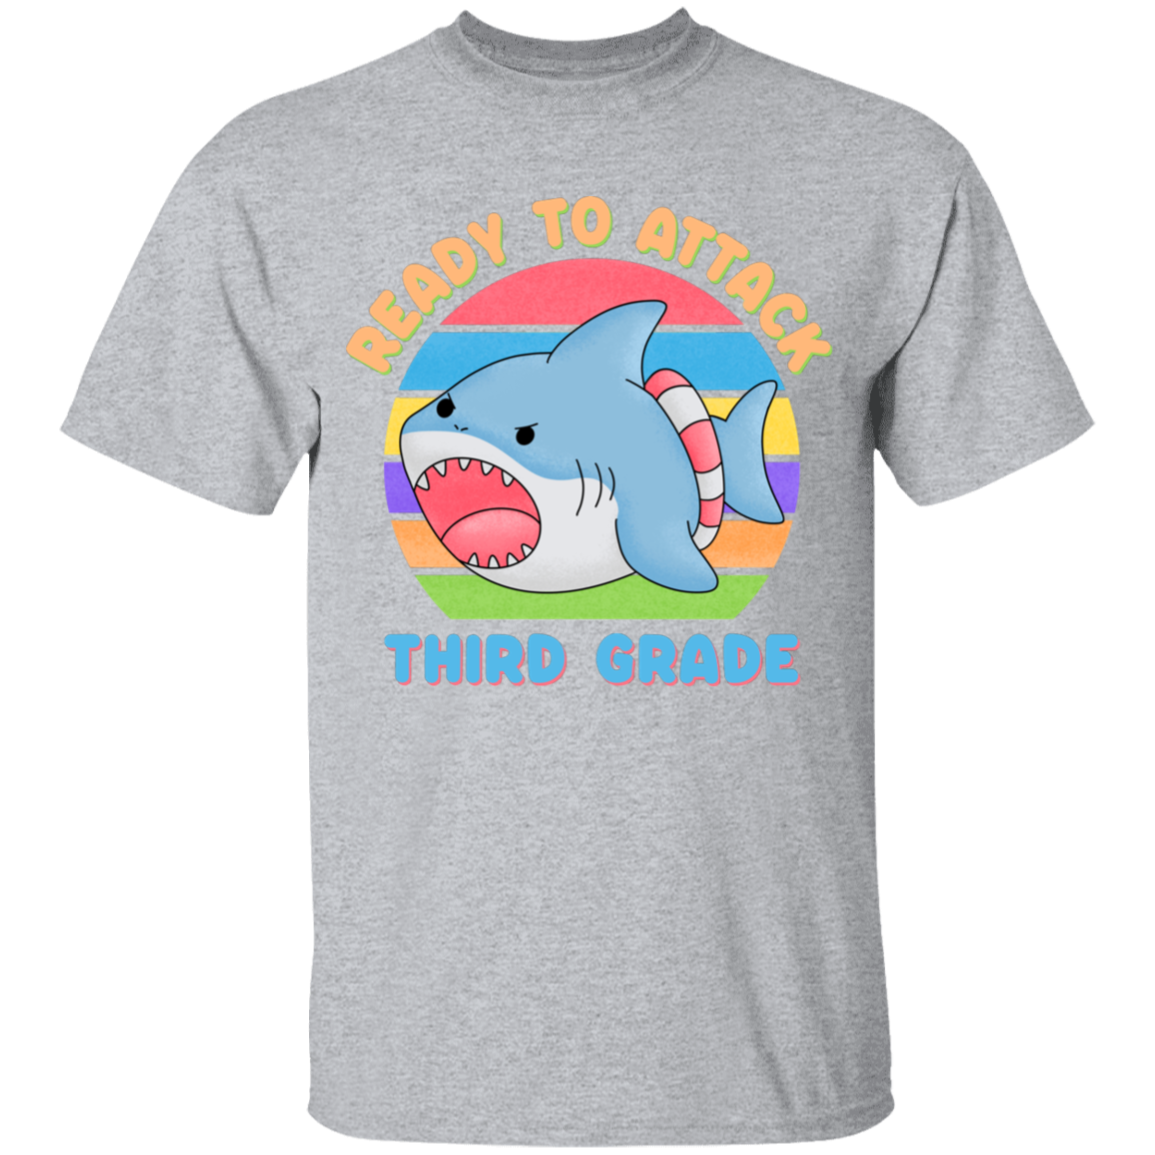 Ready To Attack Third Grade Youth Cotton T-Shirt